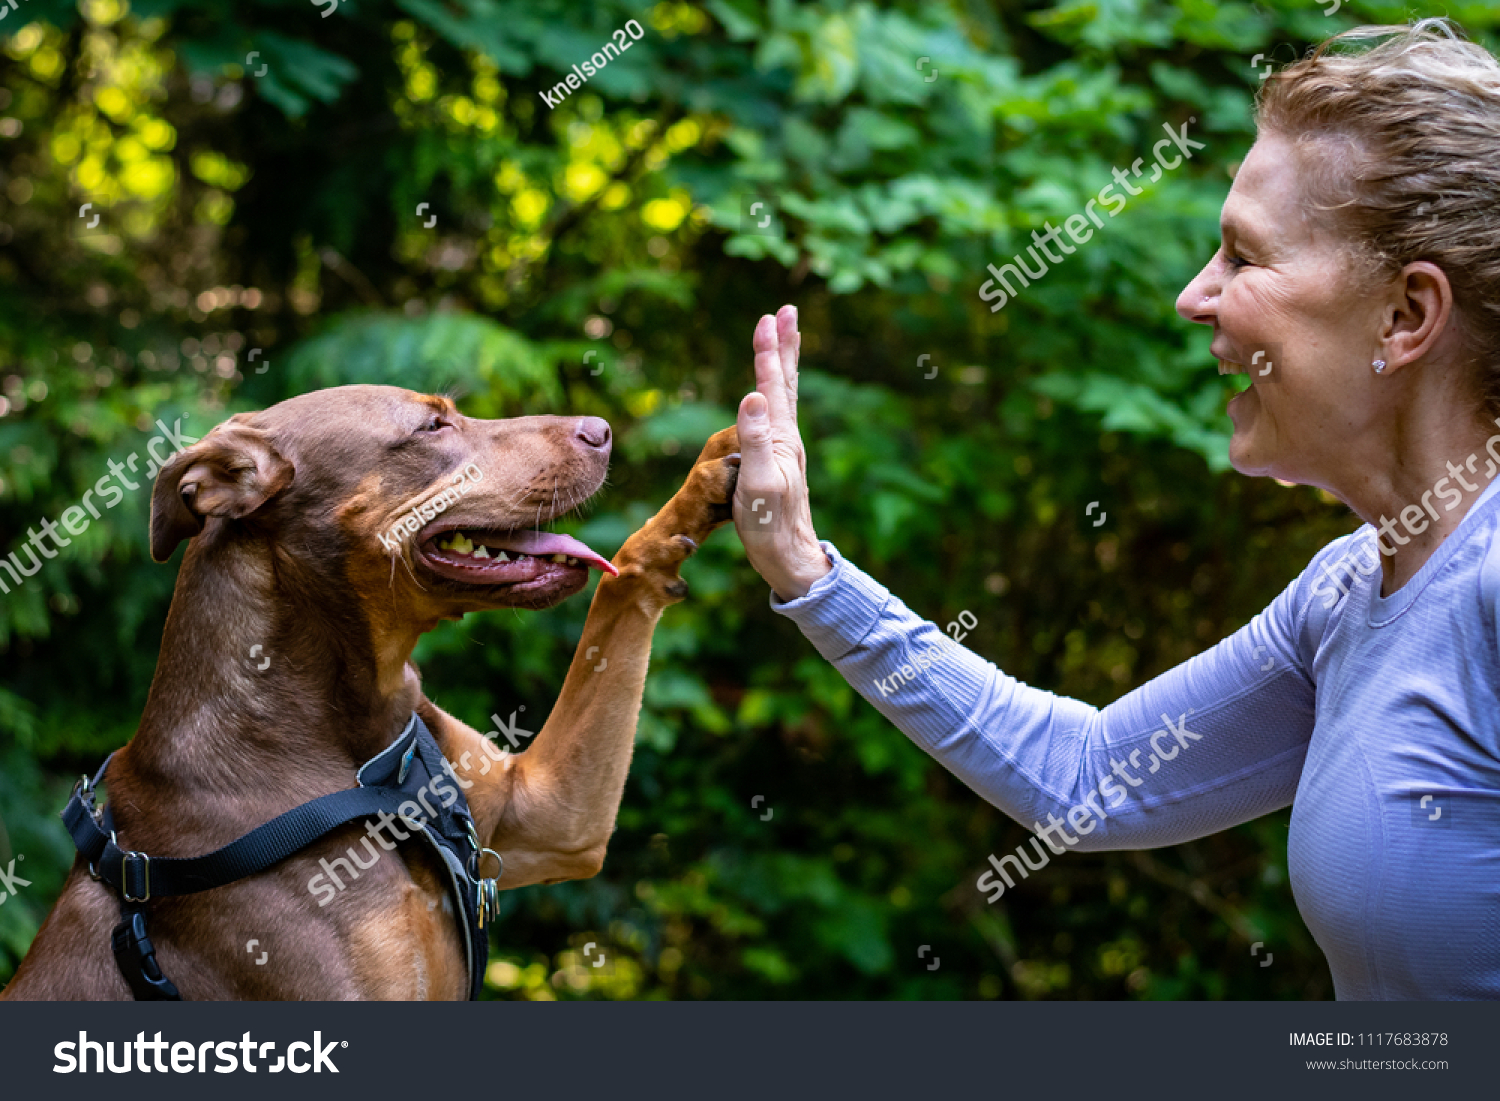 A middle aged woman and her two toned brown dog out in the woods, dog and woman playing high five and smiling
 #1117683878